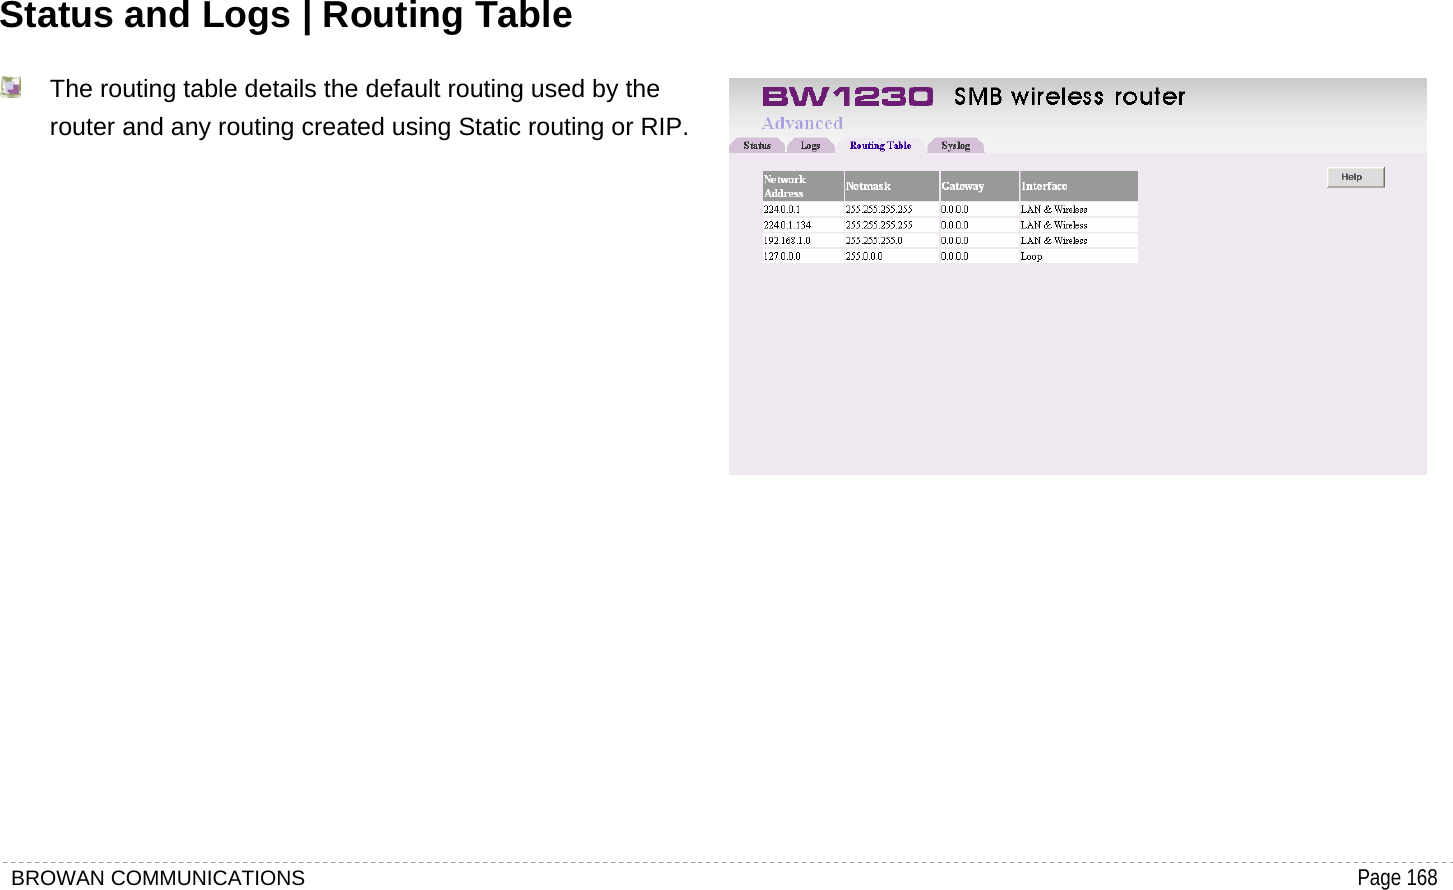 BROWAN COMMUNICATIONS                                                                                           Page 168  Status and Logs | Routing Table   The routing table details the default routing used by the router and any routing created using Static routing or RIP.           